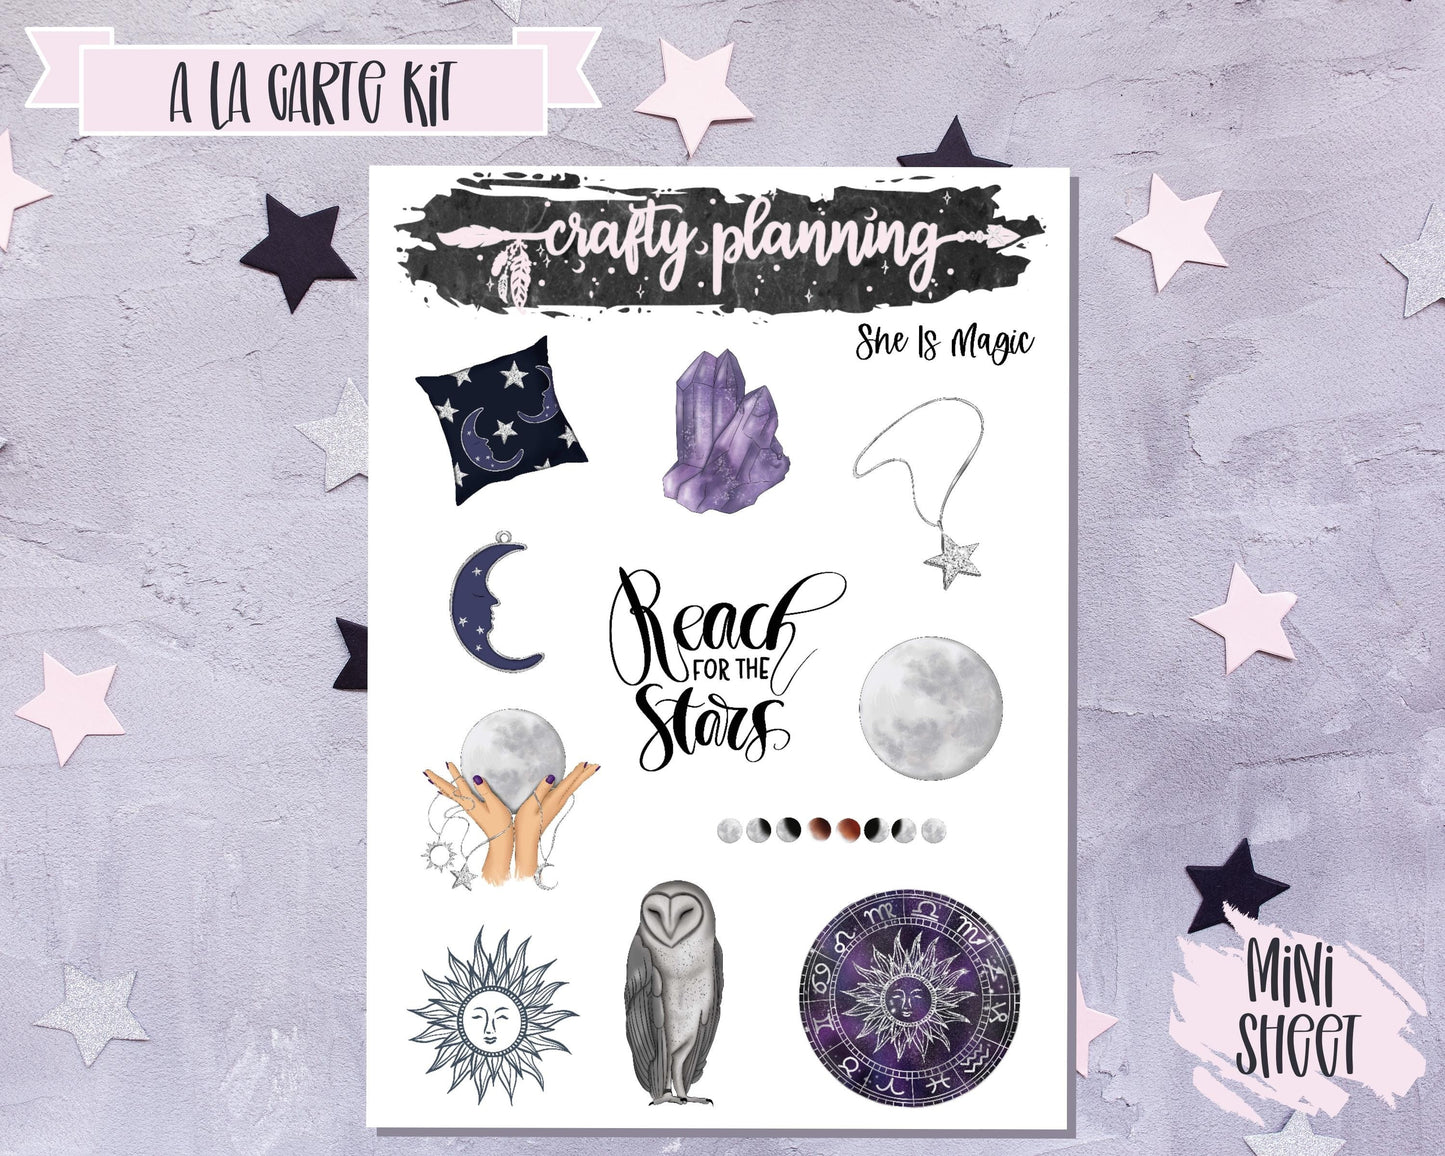 Witchcraft Stickers, Weekly Planner Kit, Witchy Stickers, Celestial Stickers, Crystal Stickers, Astrology Stickers, Esoteric Stickers